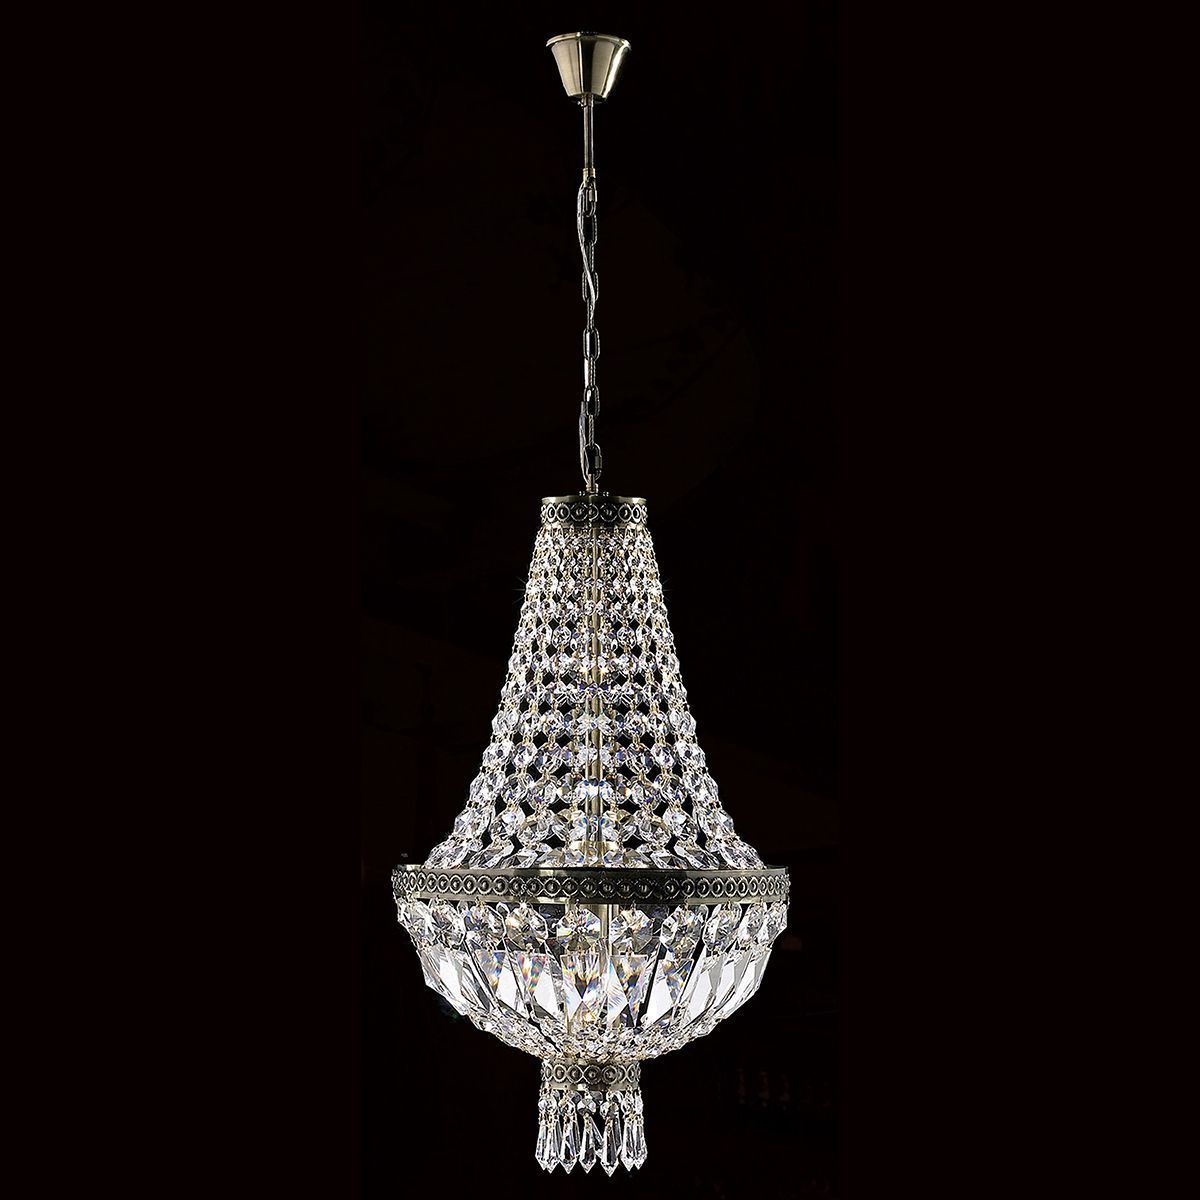 French Empire 5 Light 16 Inch Antique Bronze Finish With Intended For Best And Newest Roman Bronze And Crystal Chandeliers (View 11 of 20)